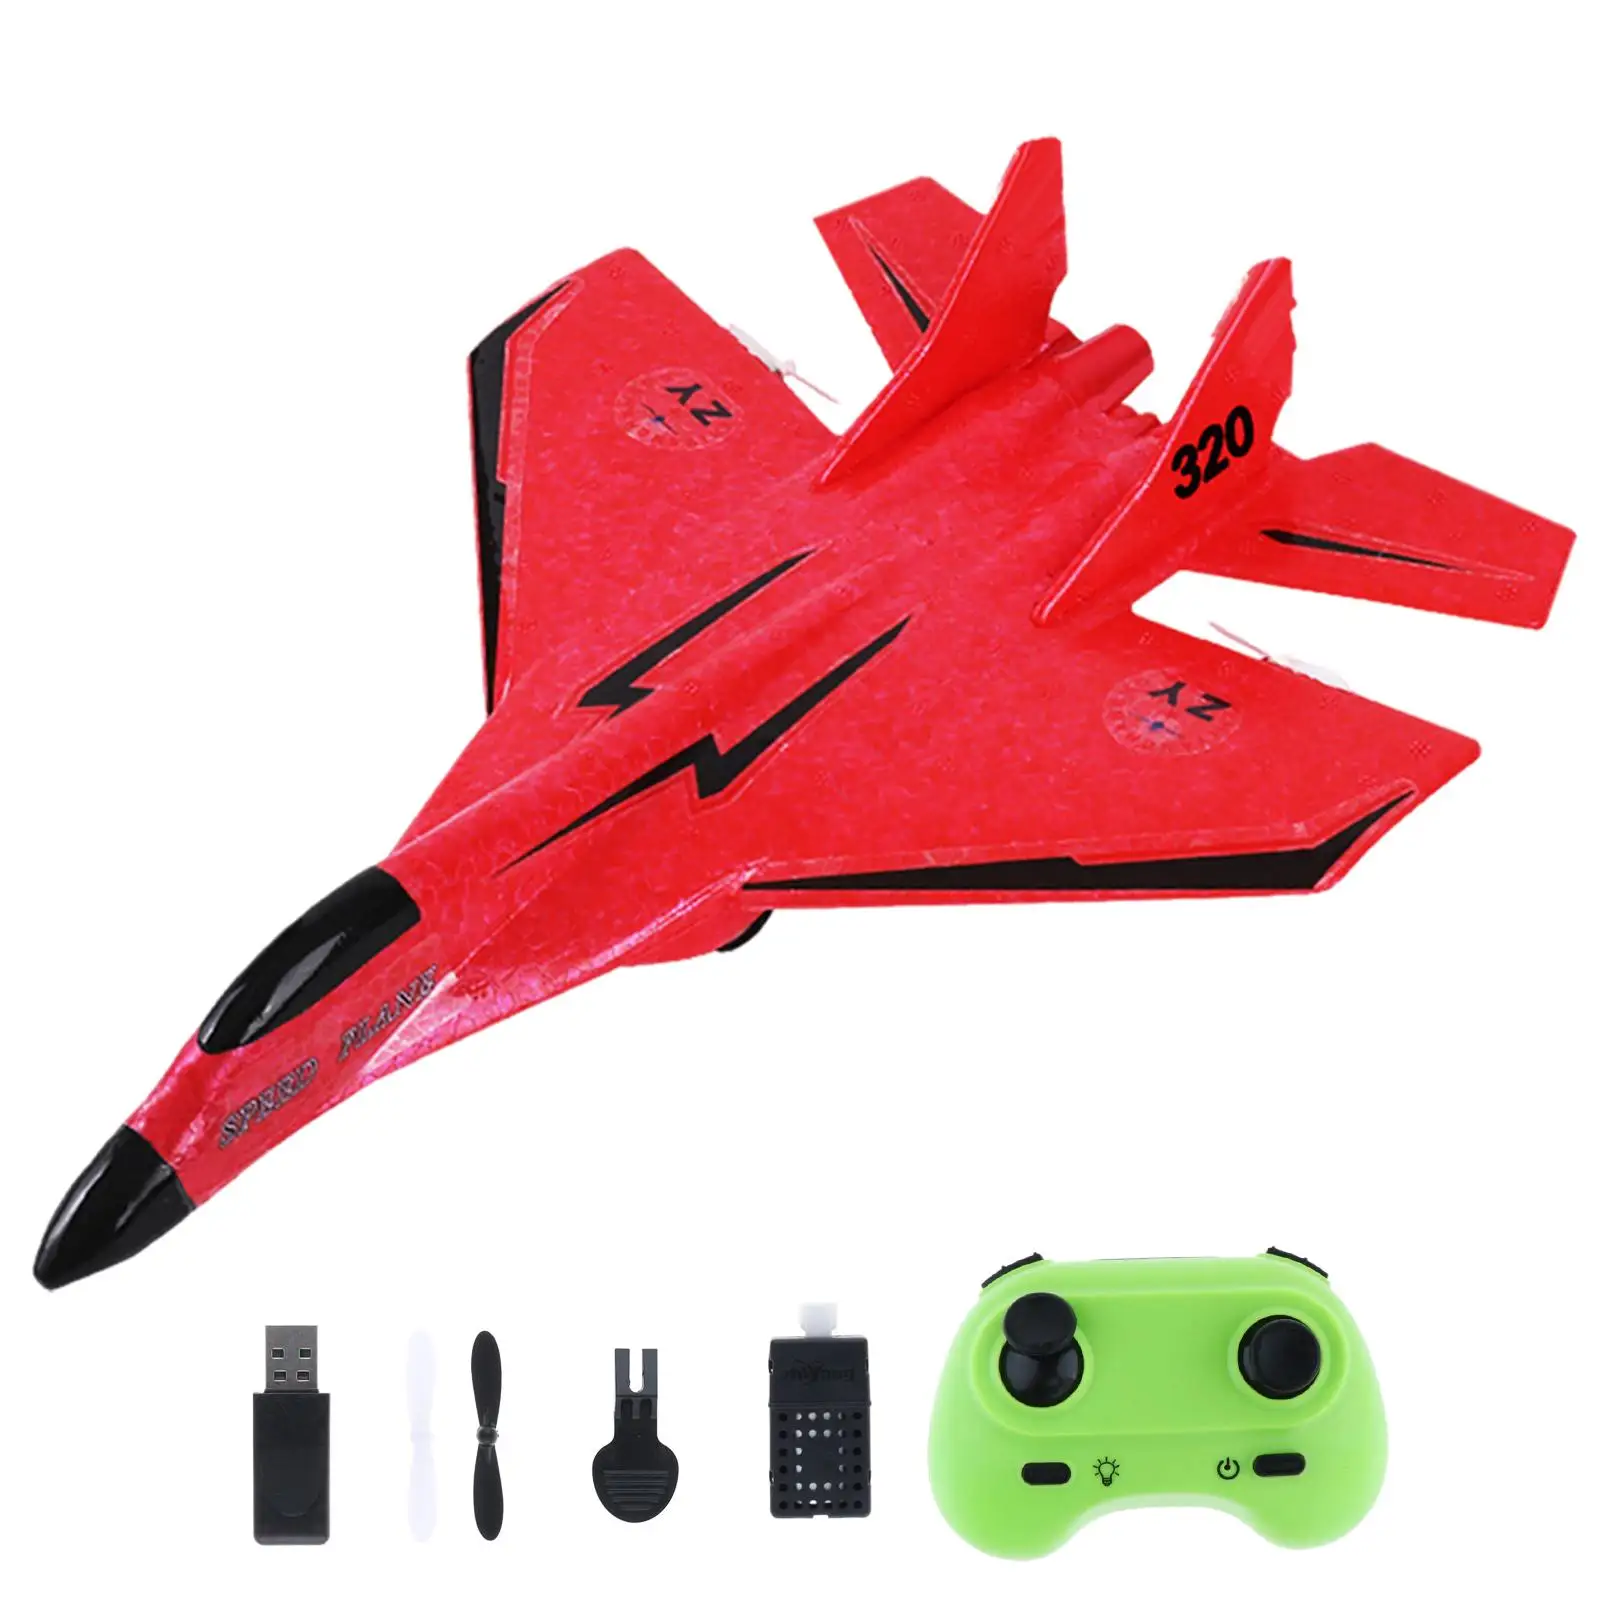 2 Plane Ready to Fly Outdooring Toys Gift Easy to Fly Aircraft Jet RC Glider for Boys Girls Kids Adults Beginner